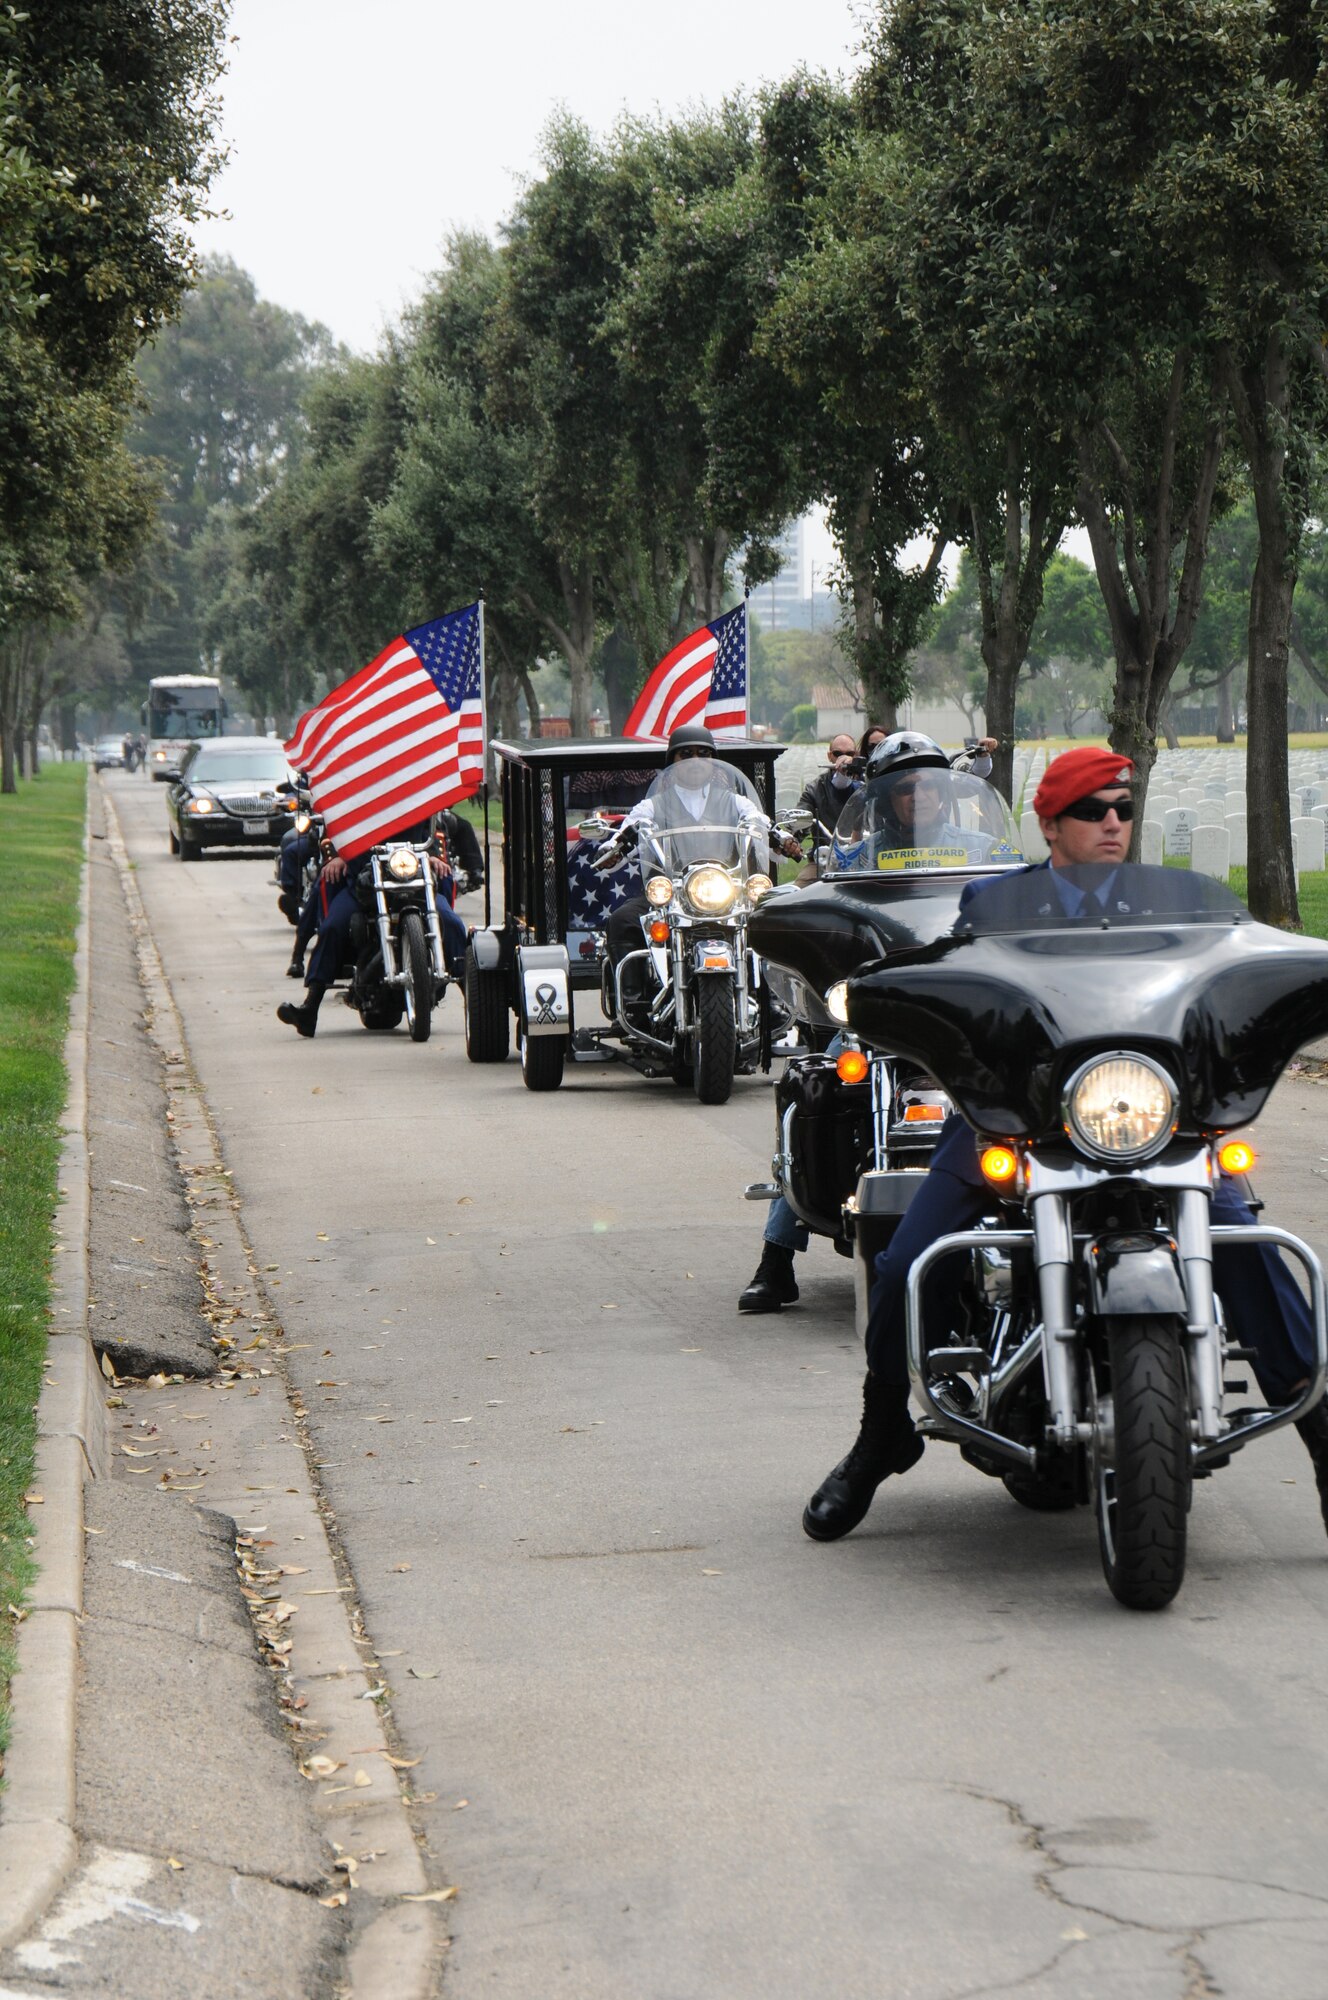 The casket of Staff Sgt. Andrew Harvell is carried to his final resting place at Los Angeles National Cemetery by a glass caisson, pulled by a motorcycle hearse company.  Harvell was a combat controller who died Aug. 6 when the CH-47 helicopter he was traveling in crashed in the Wardak province of Afghanistan.  Harvell was one of 30 Americans who died.  (U.S. Air Force photo by Joe Juarez)